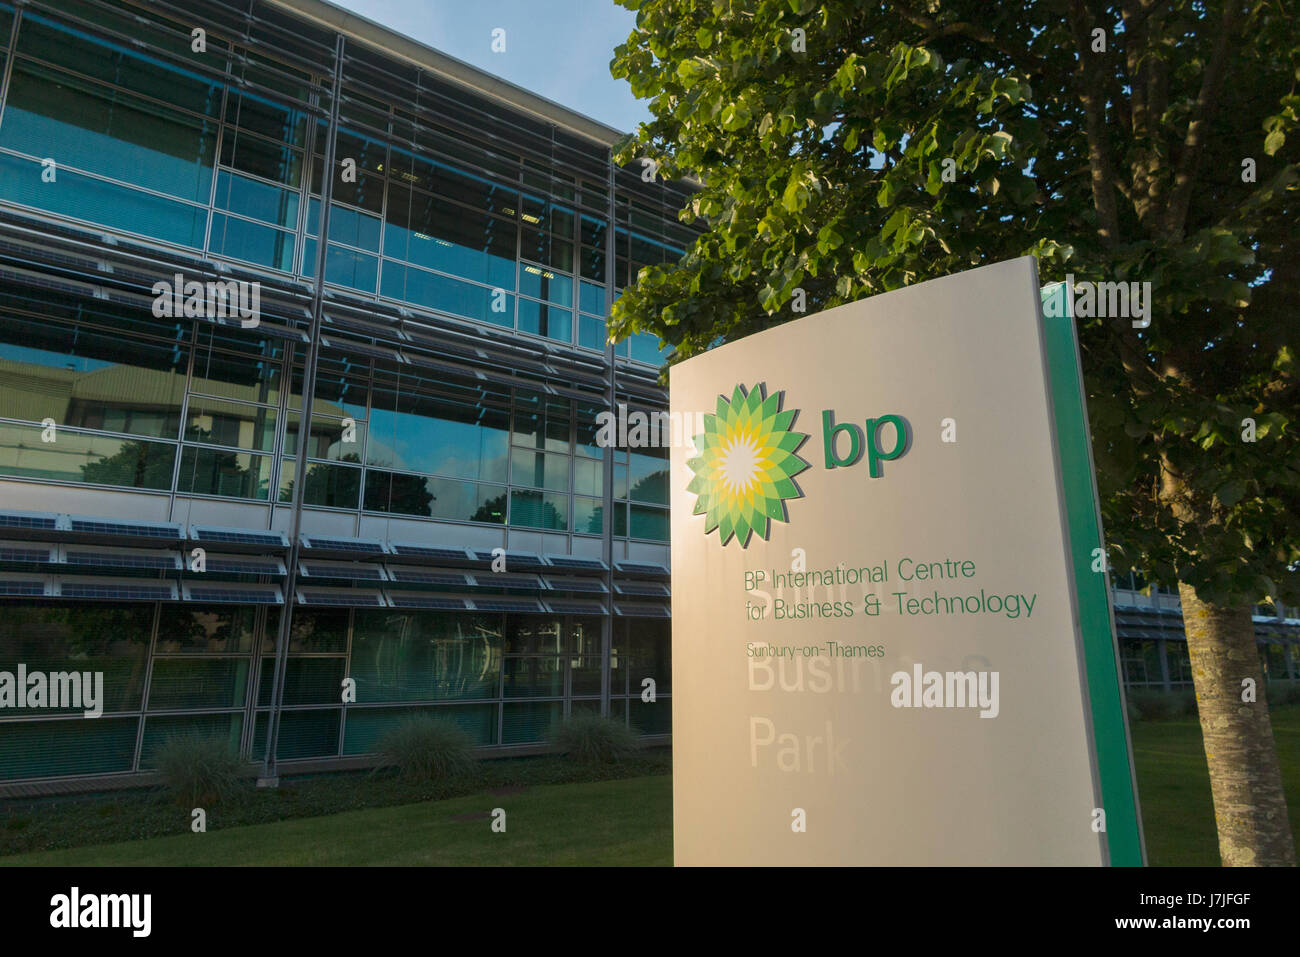 The Sunbury Business Park offices of BP PLC, at the Sunbury business Park, Sunbury on Thames. Middlesex. UK (87) Stock Photo